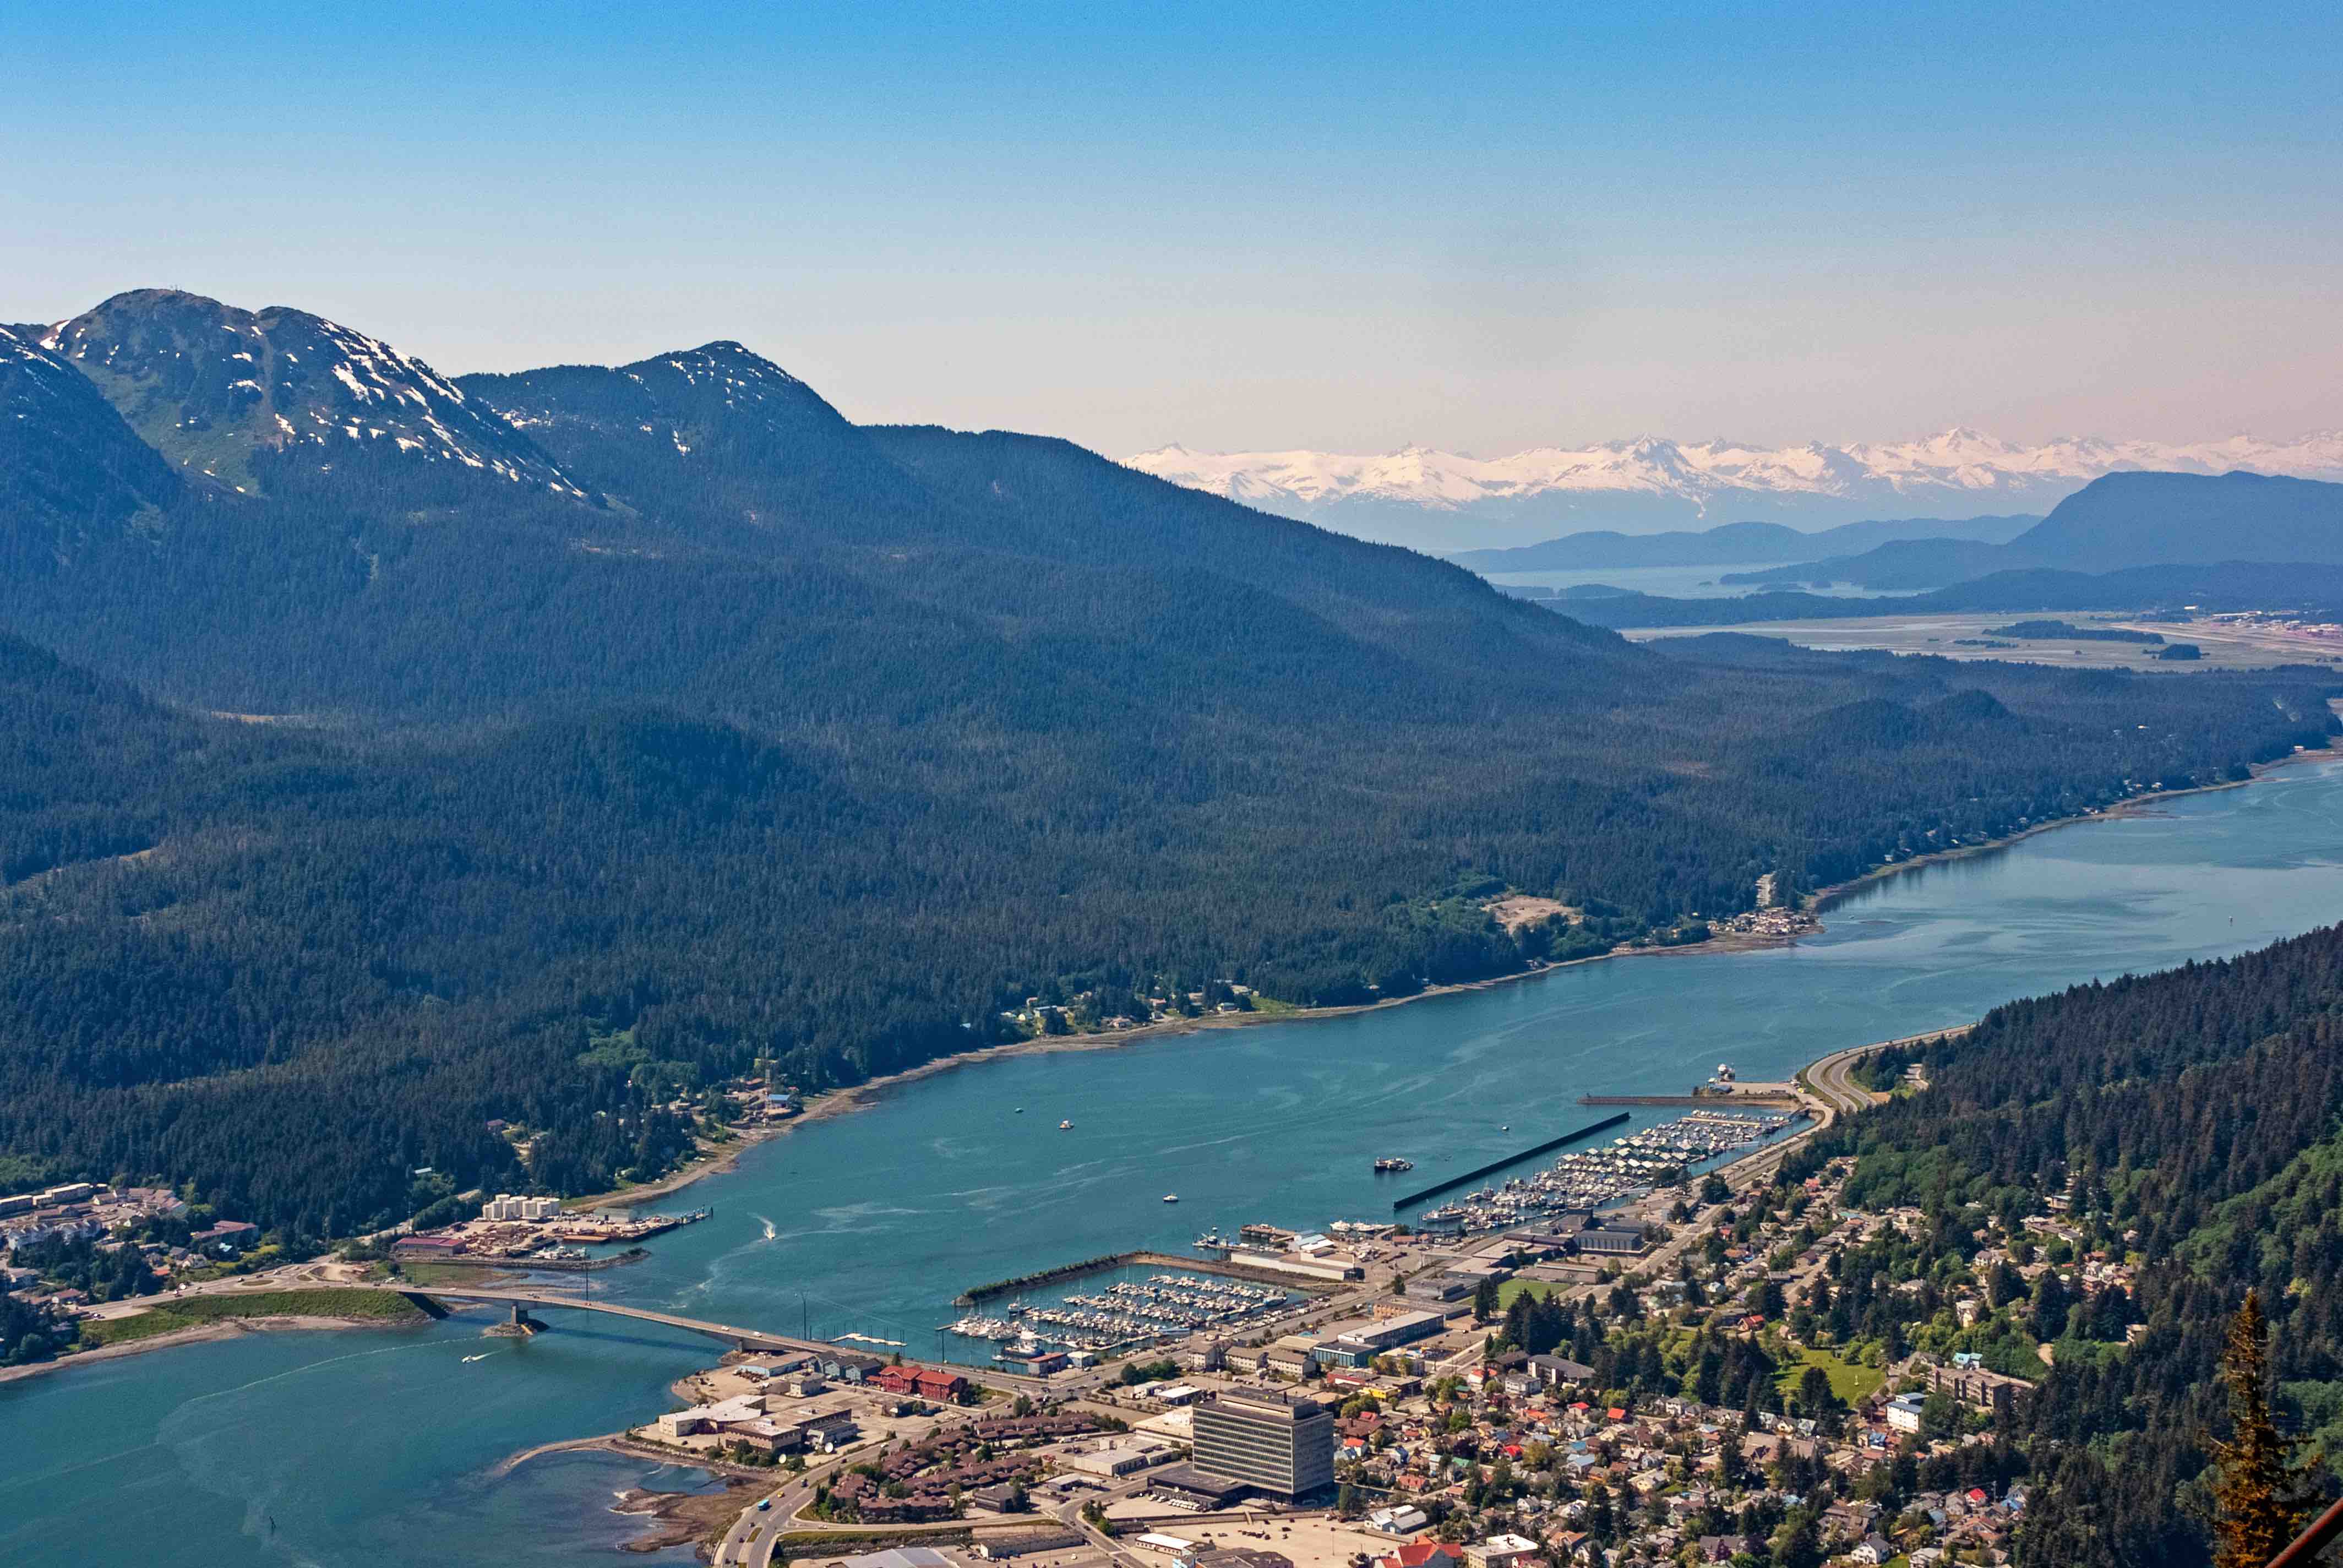 Aerial view of Gastineau Channel, Douglas Island, and downtown Juneau